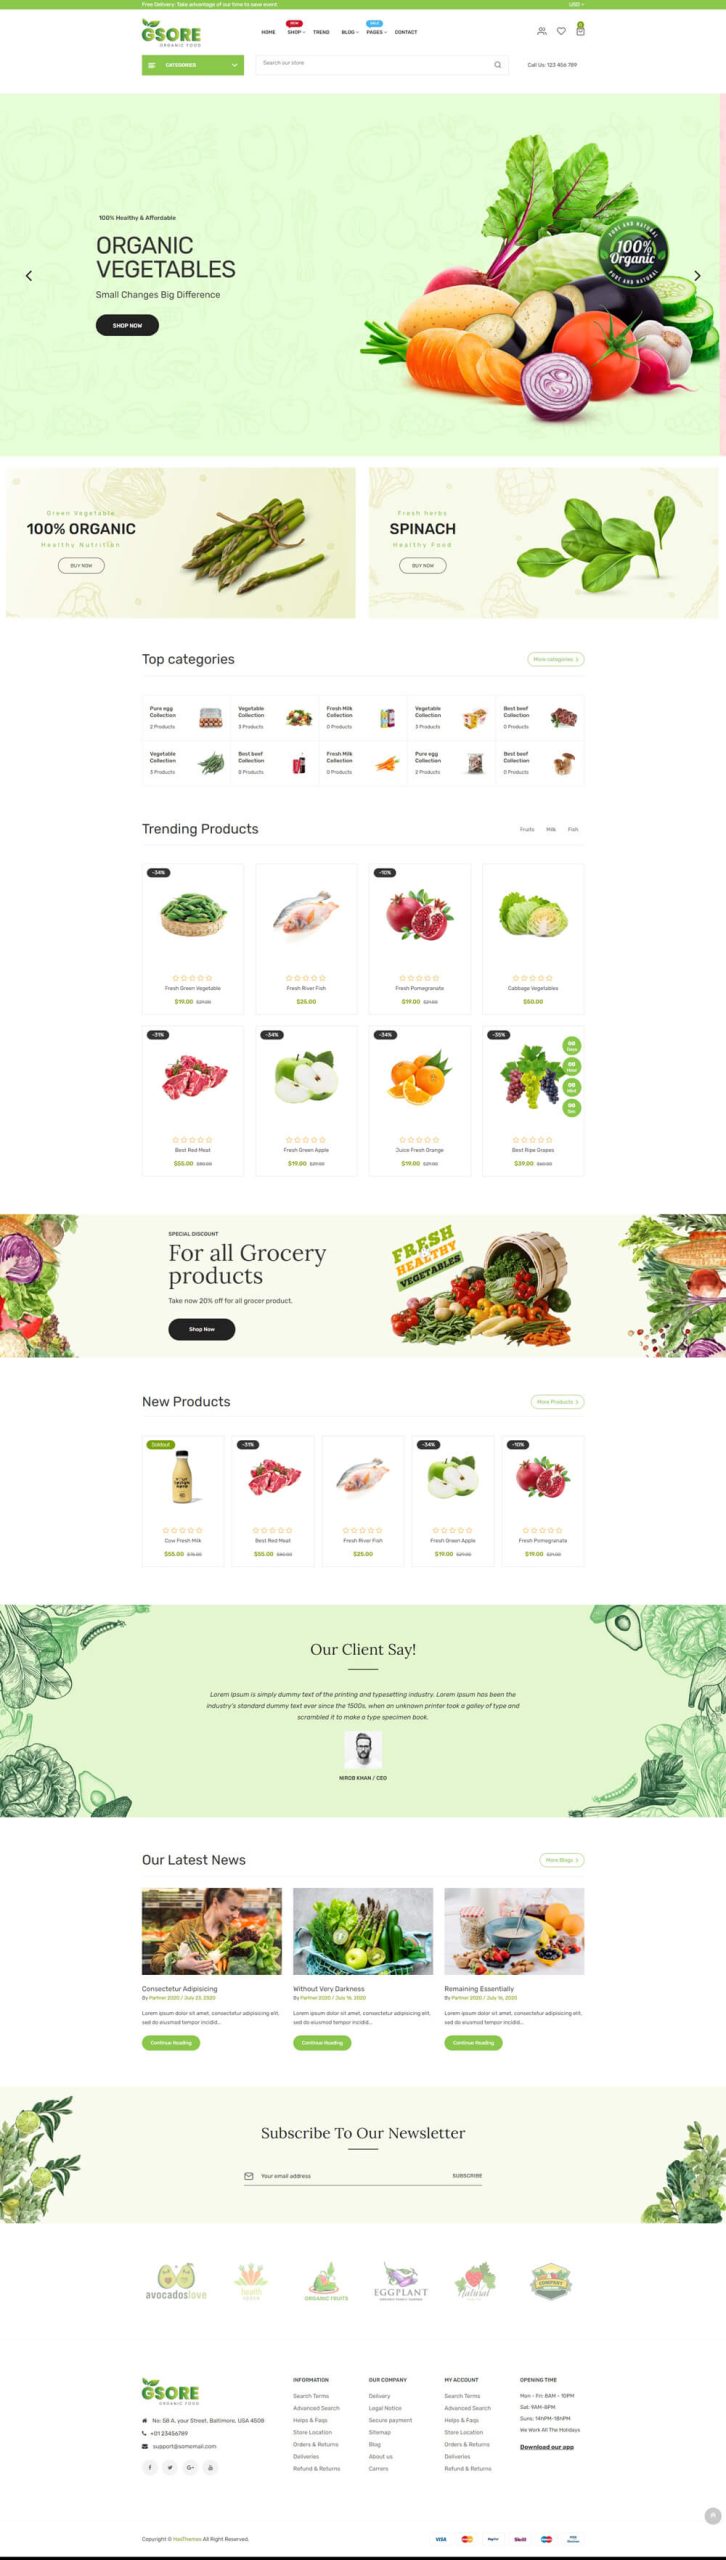 Gsore – Grocery and Organic Food Store Shop Shopify Theme